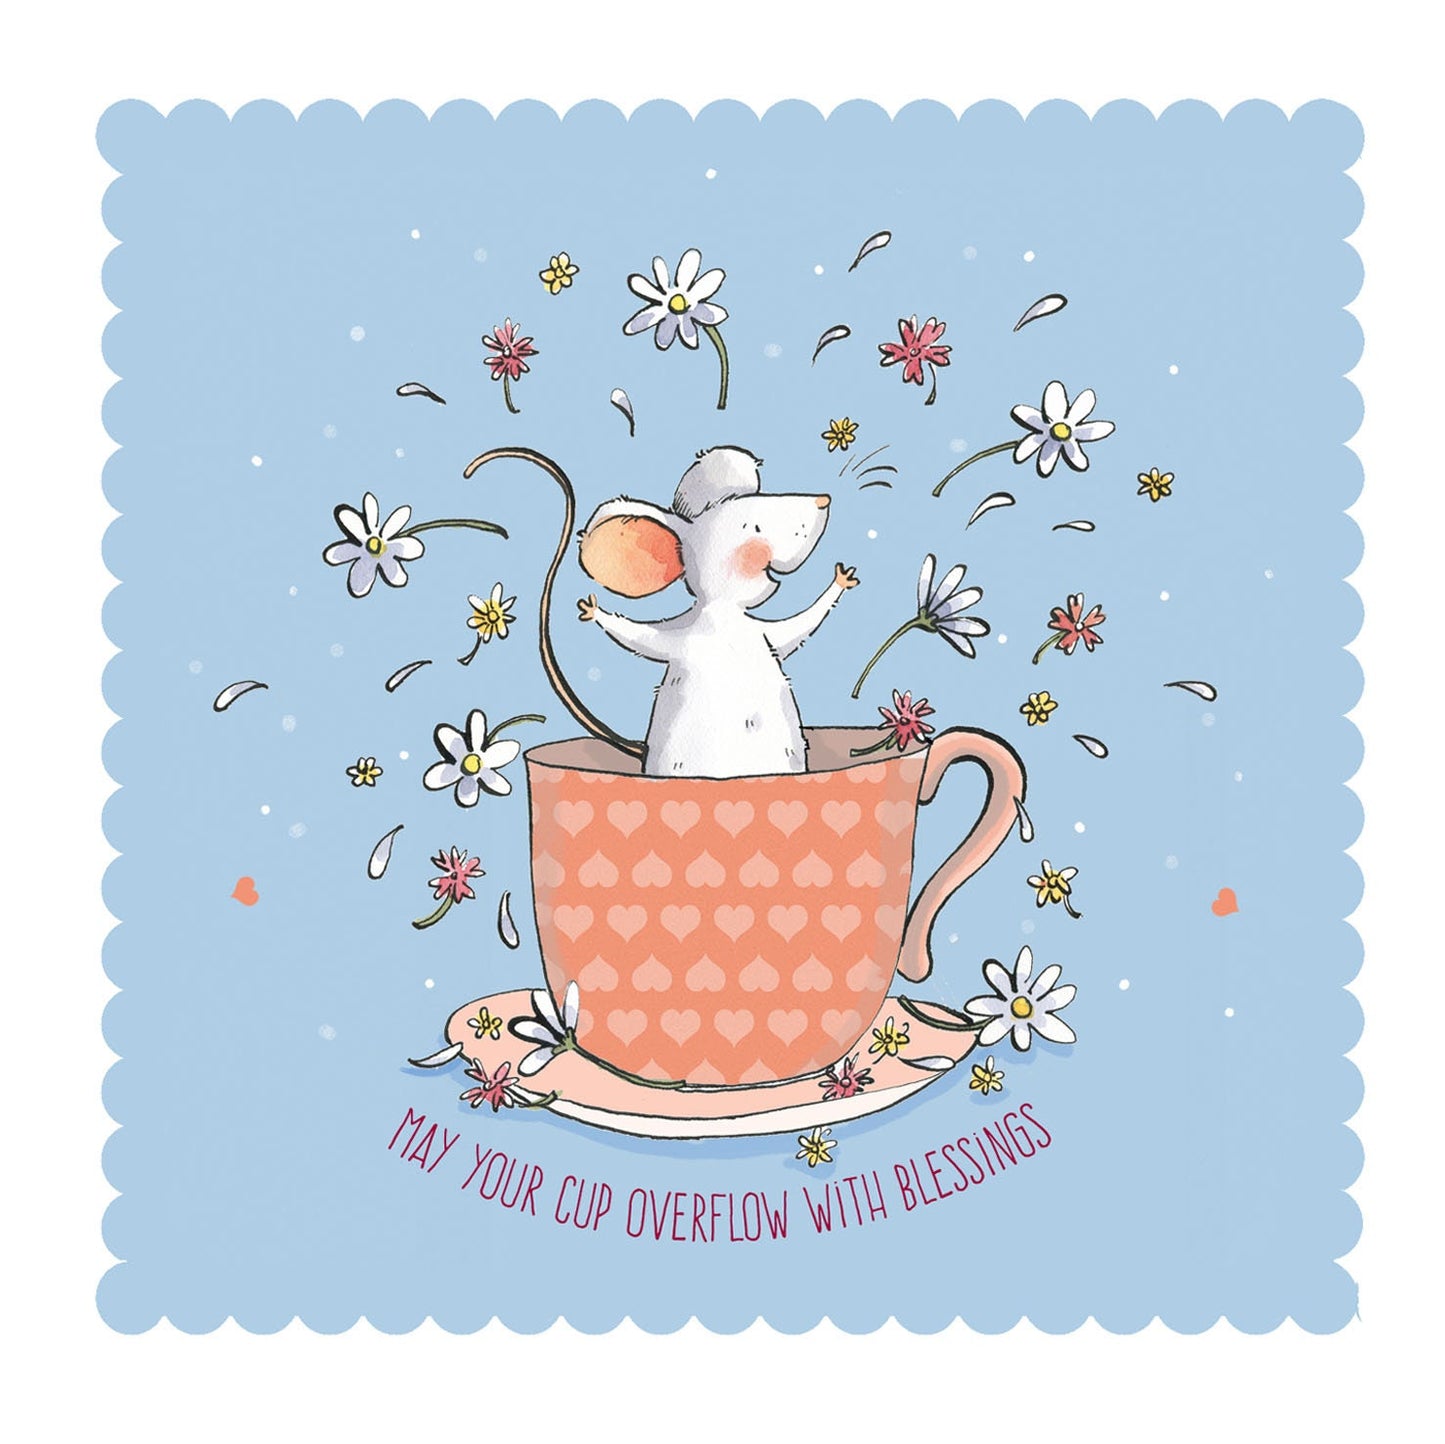 Cup of Blessing Notecard